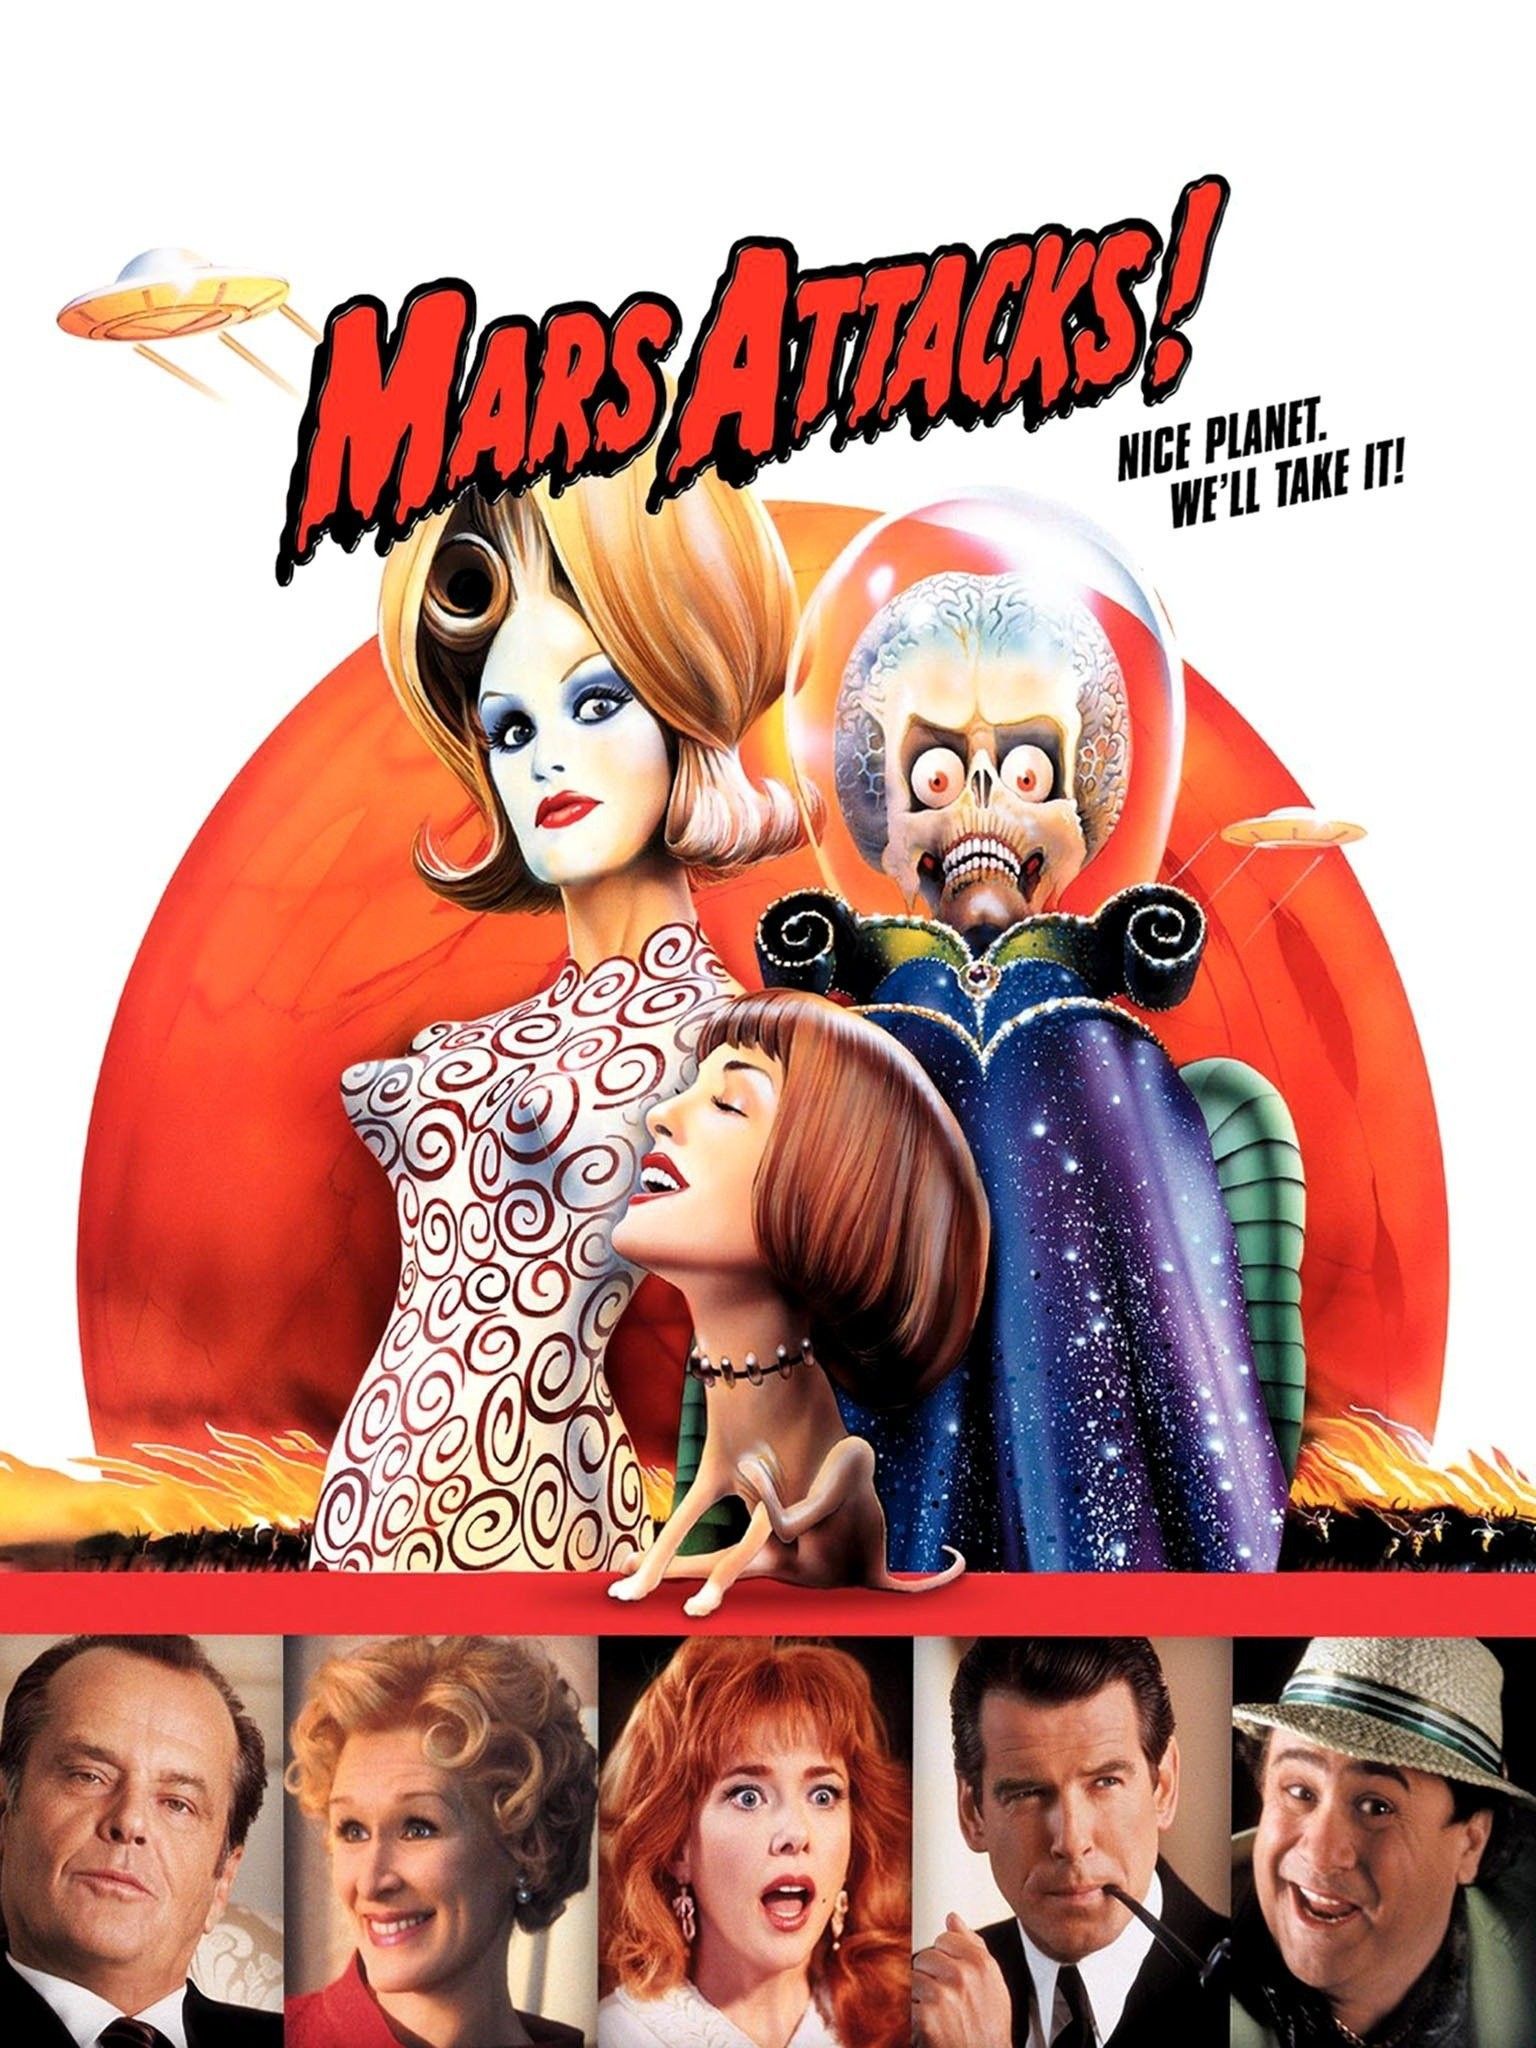 Mars Attacks! official movie poster from 1996